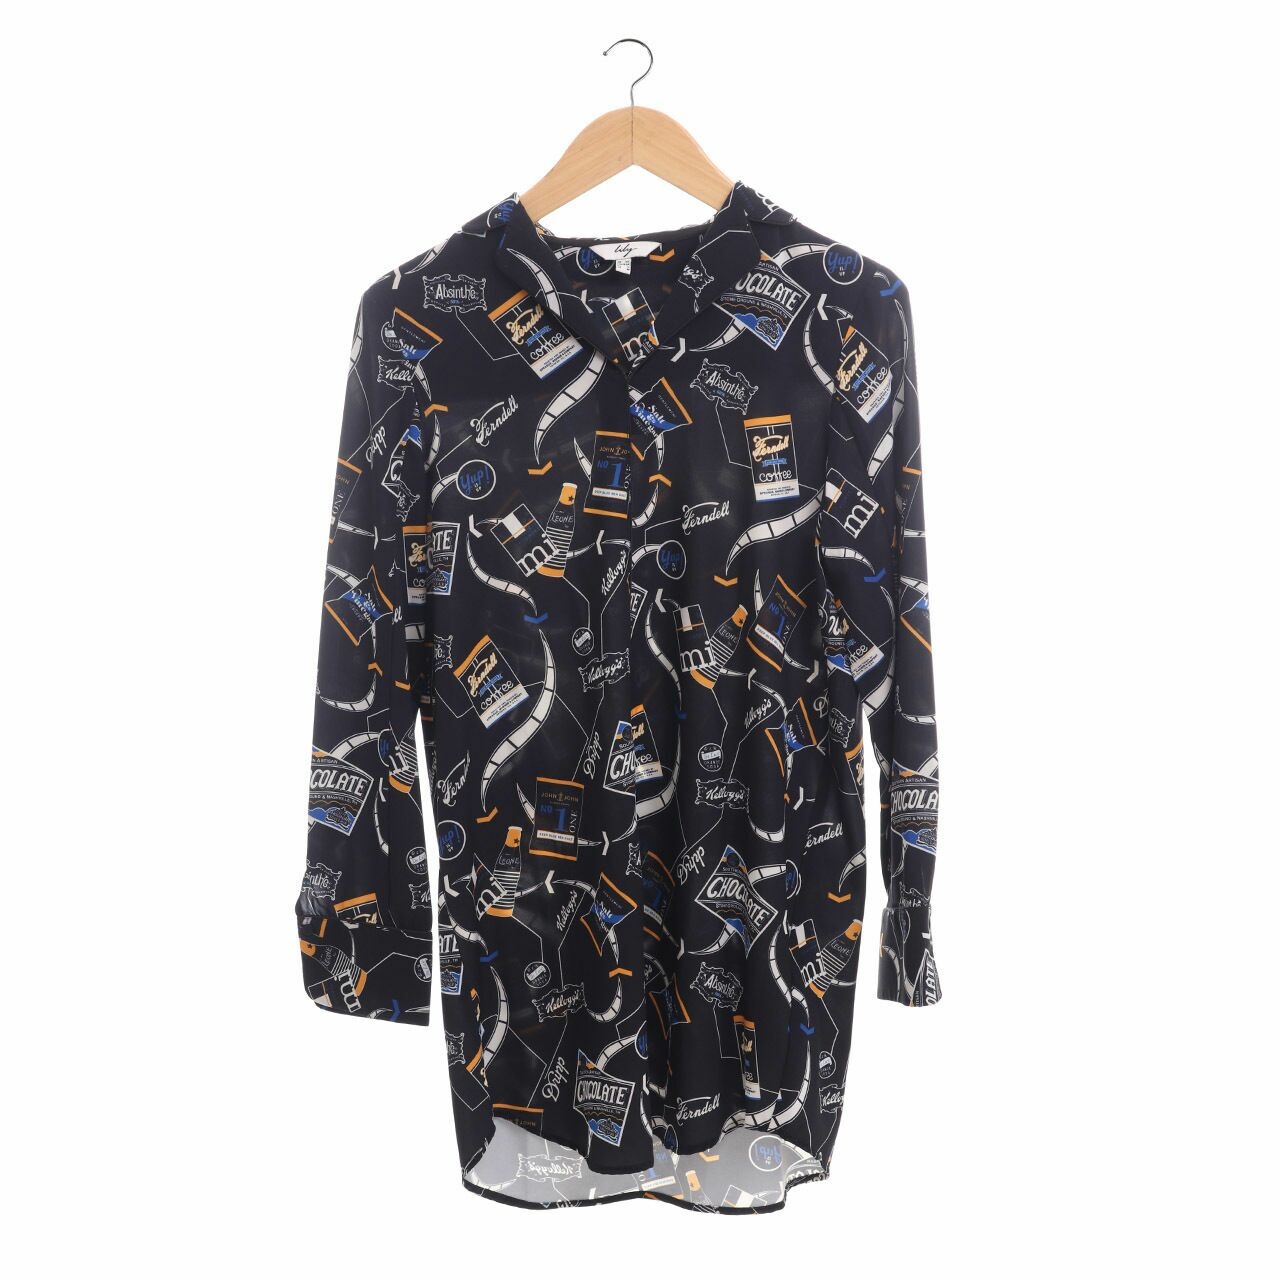 Lily Black Printed Blouse